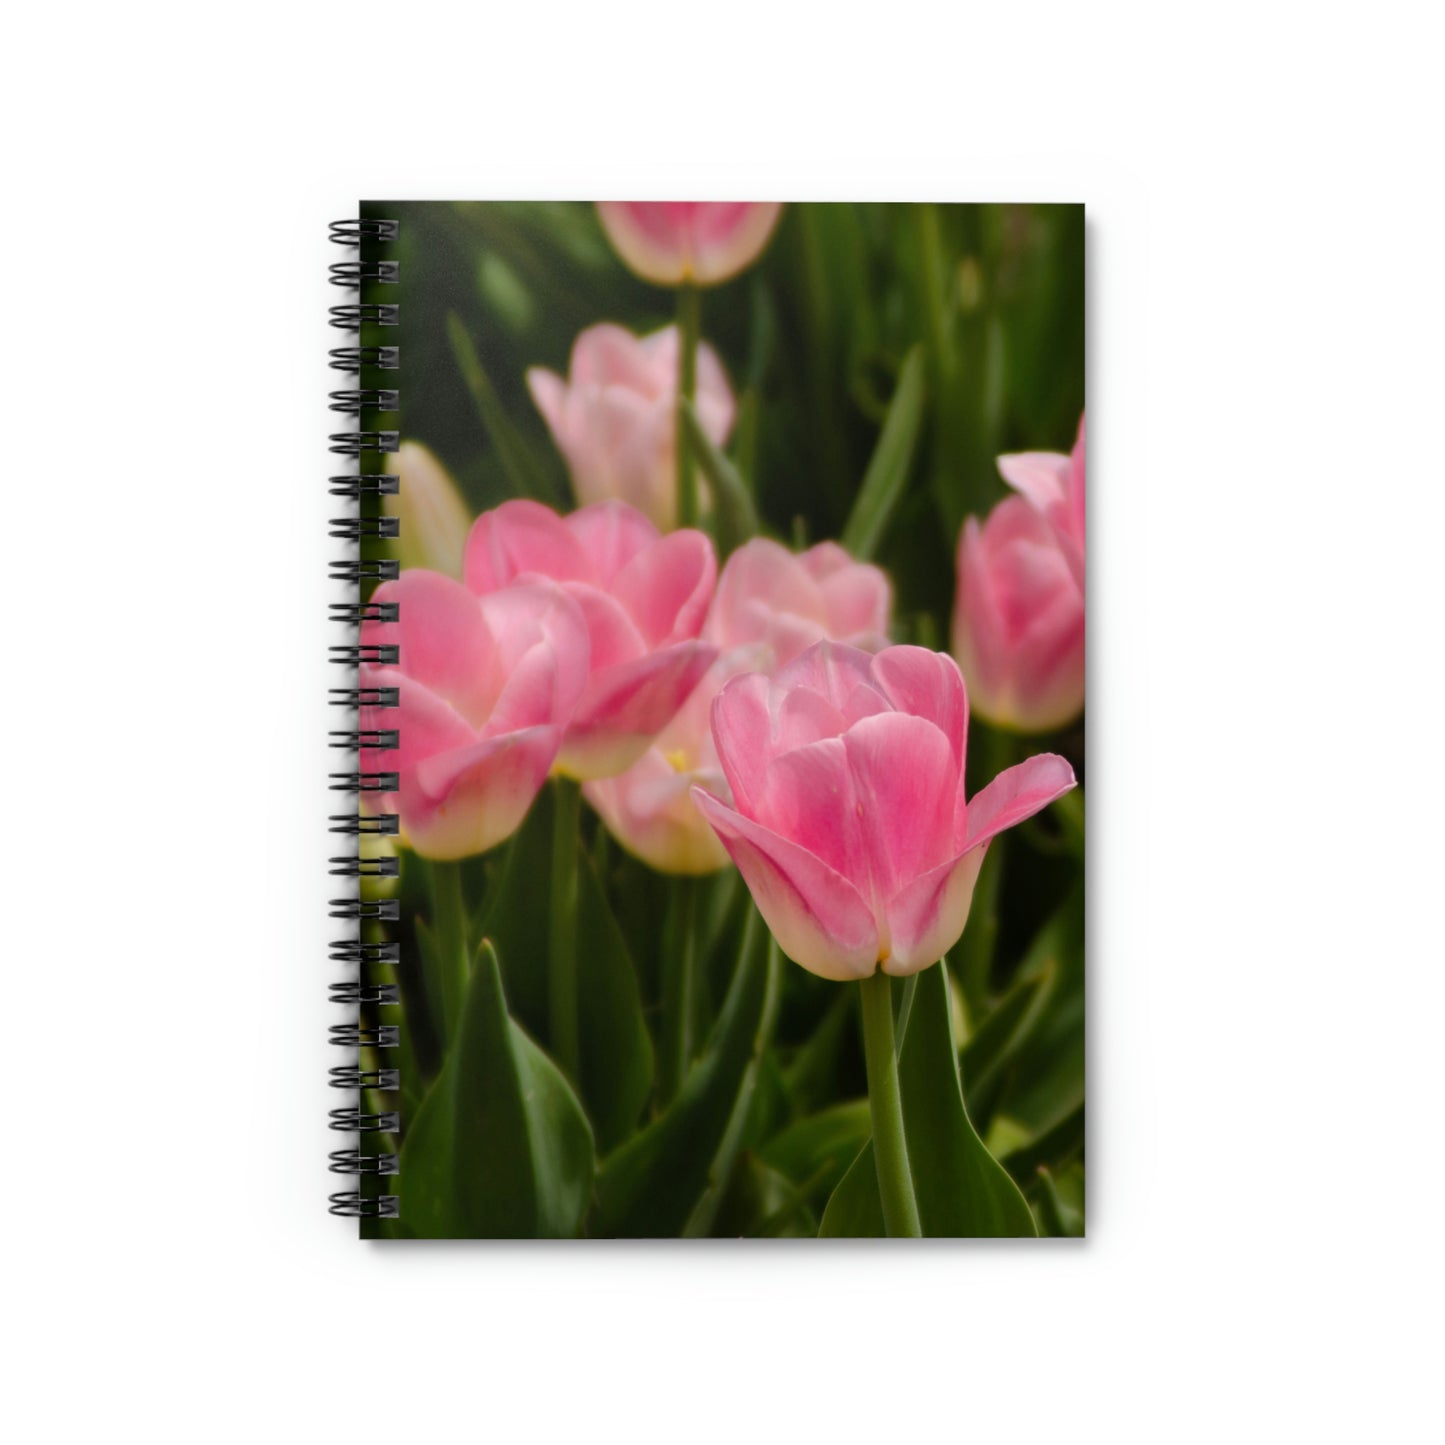 Flowers 17 Spiral Notebook - Ruled Line